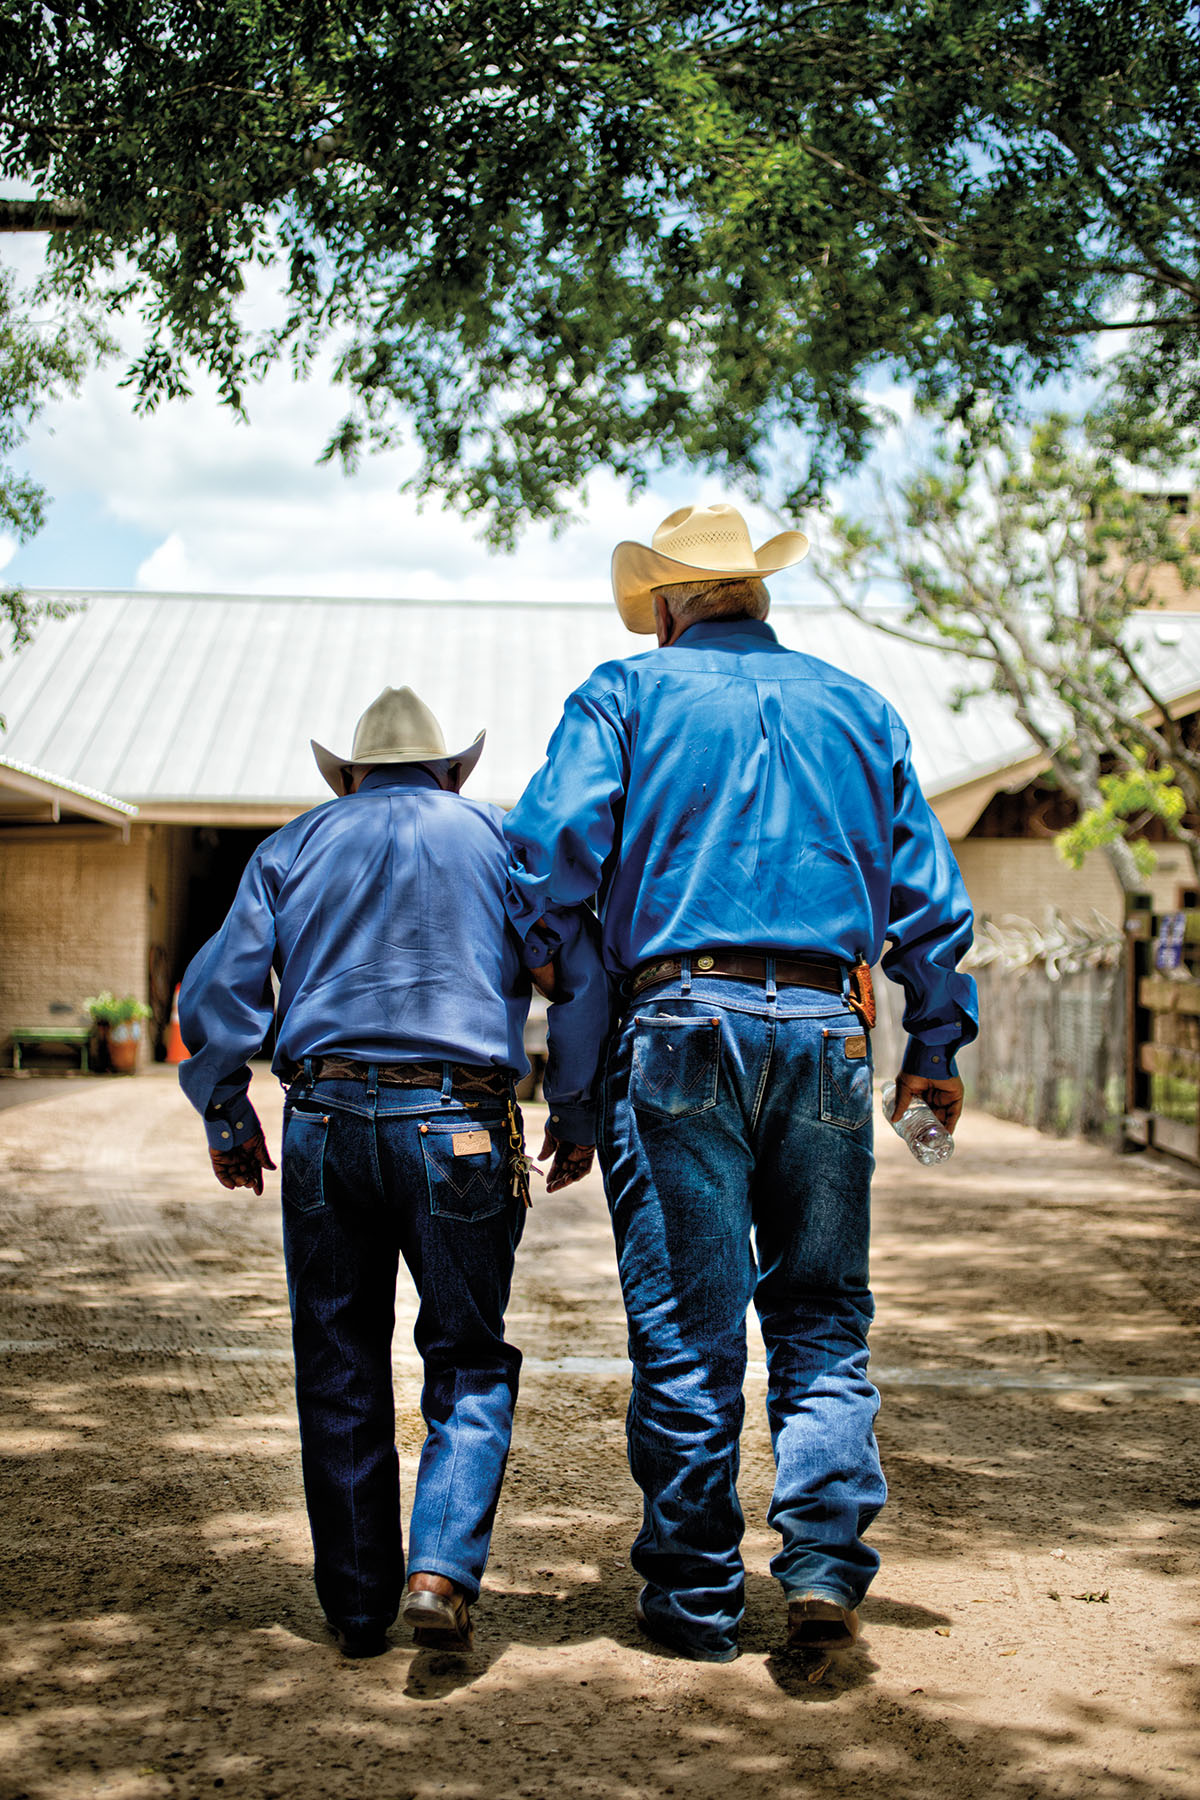 Two men, both wearing cowboy hats, blue shirts and blue jeans, walk along a dirt path